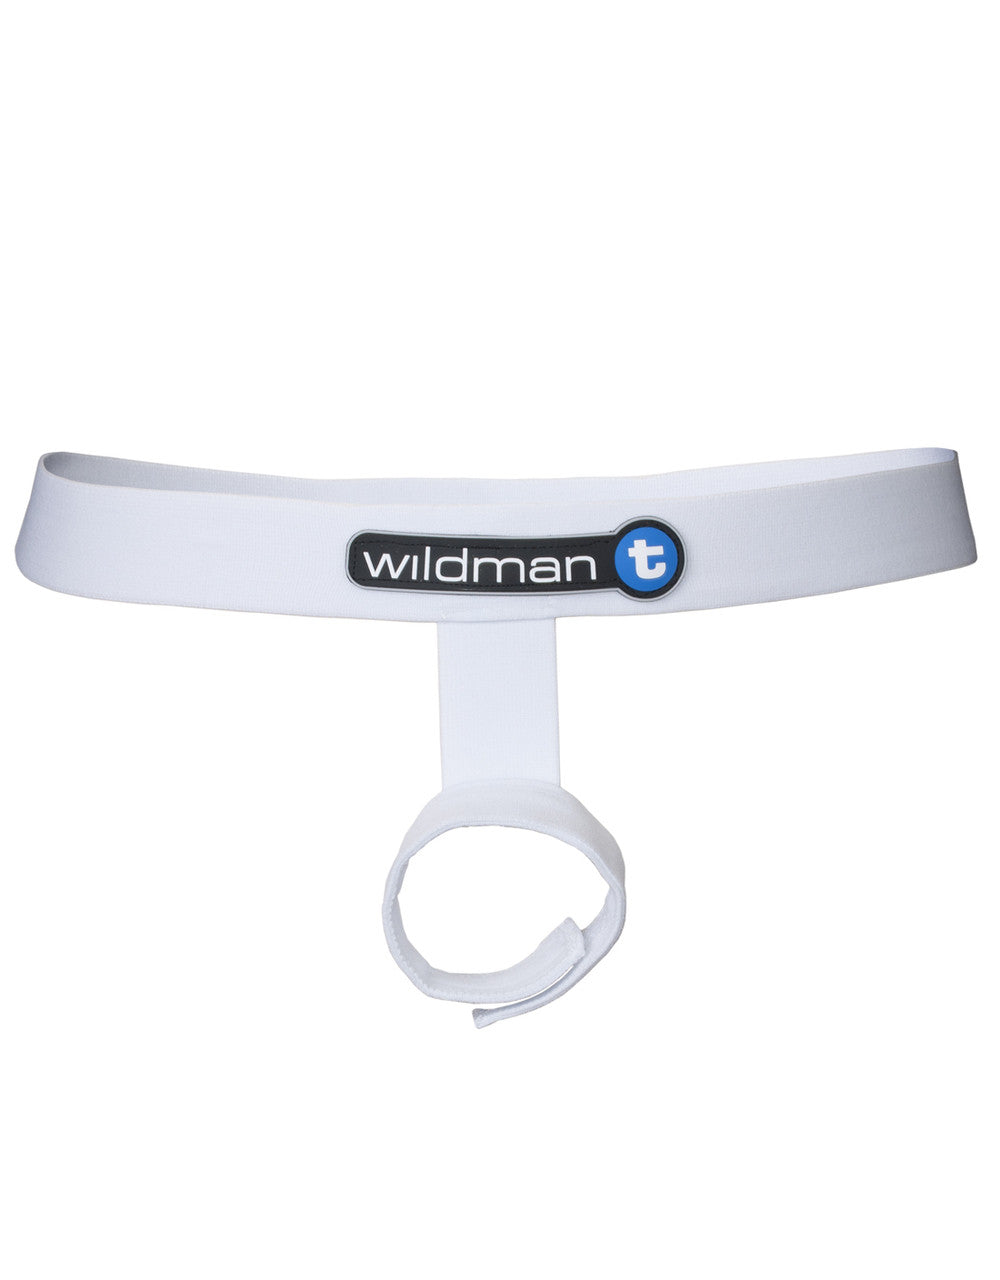 WildmanT Ball Lifter Sport Protruder! White - DealByEthan.gay